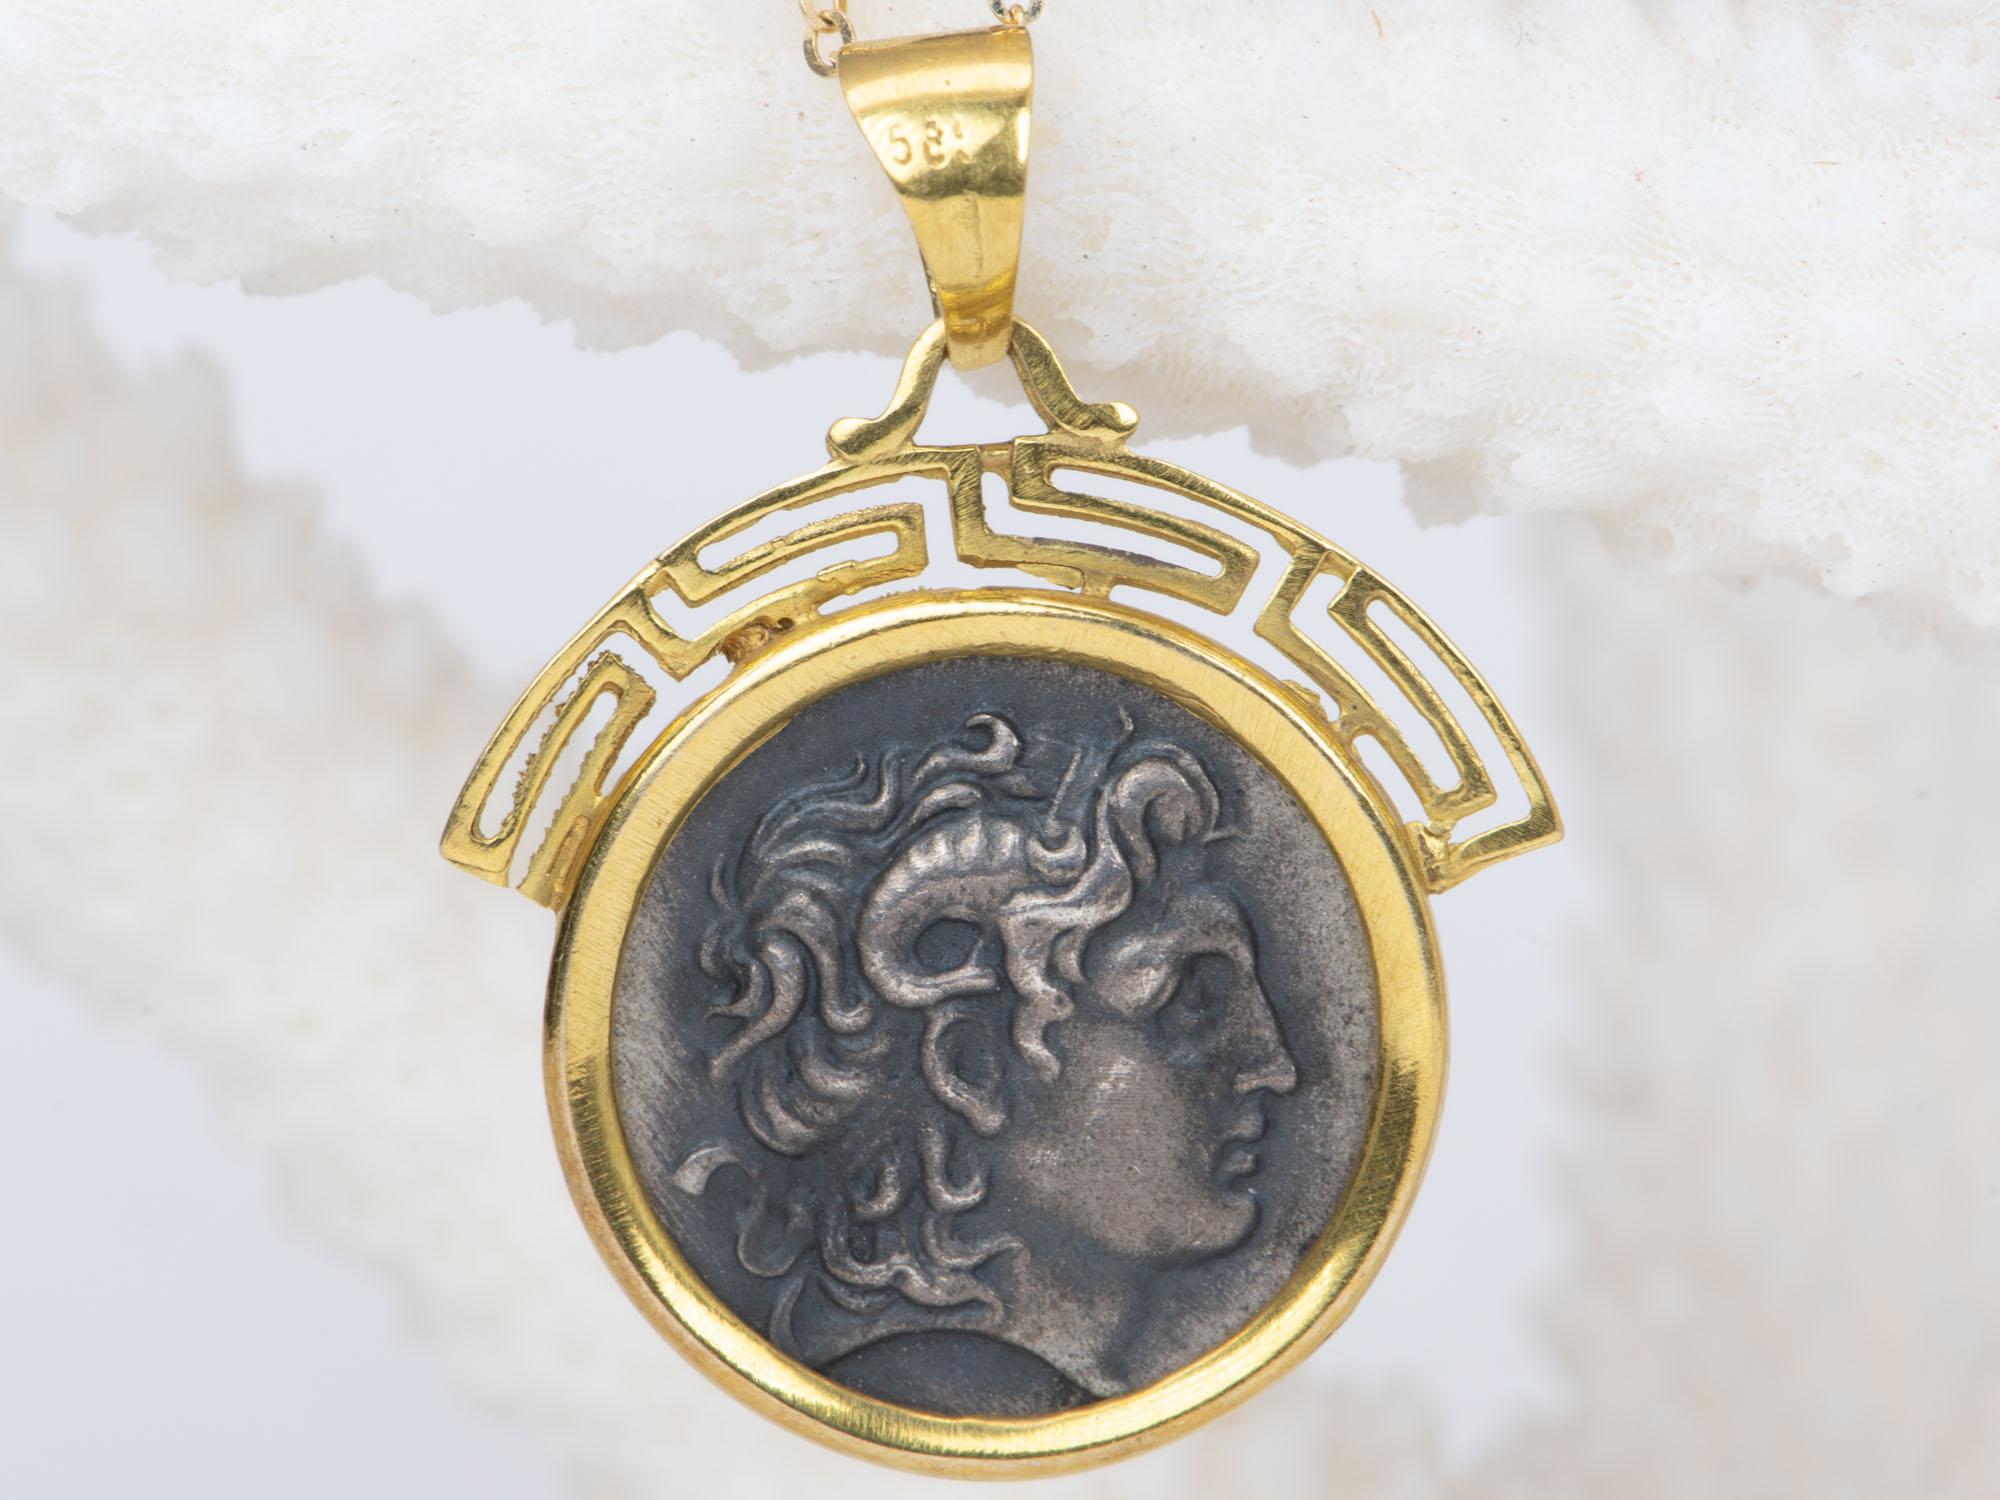 ♥ A solid 14K yellow gold pendant encasing a sterling silver Alexander the Great coin (a replica of a real ancient coin)

♥ The pendant measures 23.8 mm in length, 22.3 mm in width, and 2.2 mm thick.

♥ Material: 14K Yellow Gold

♥ The necklace